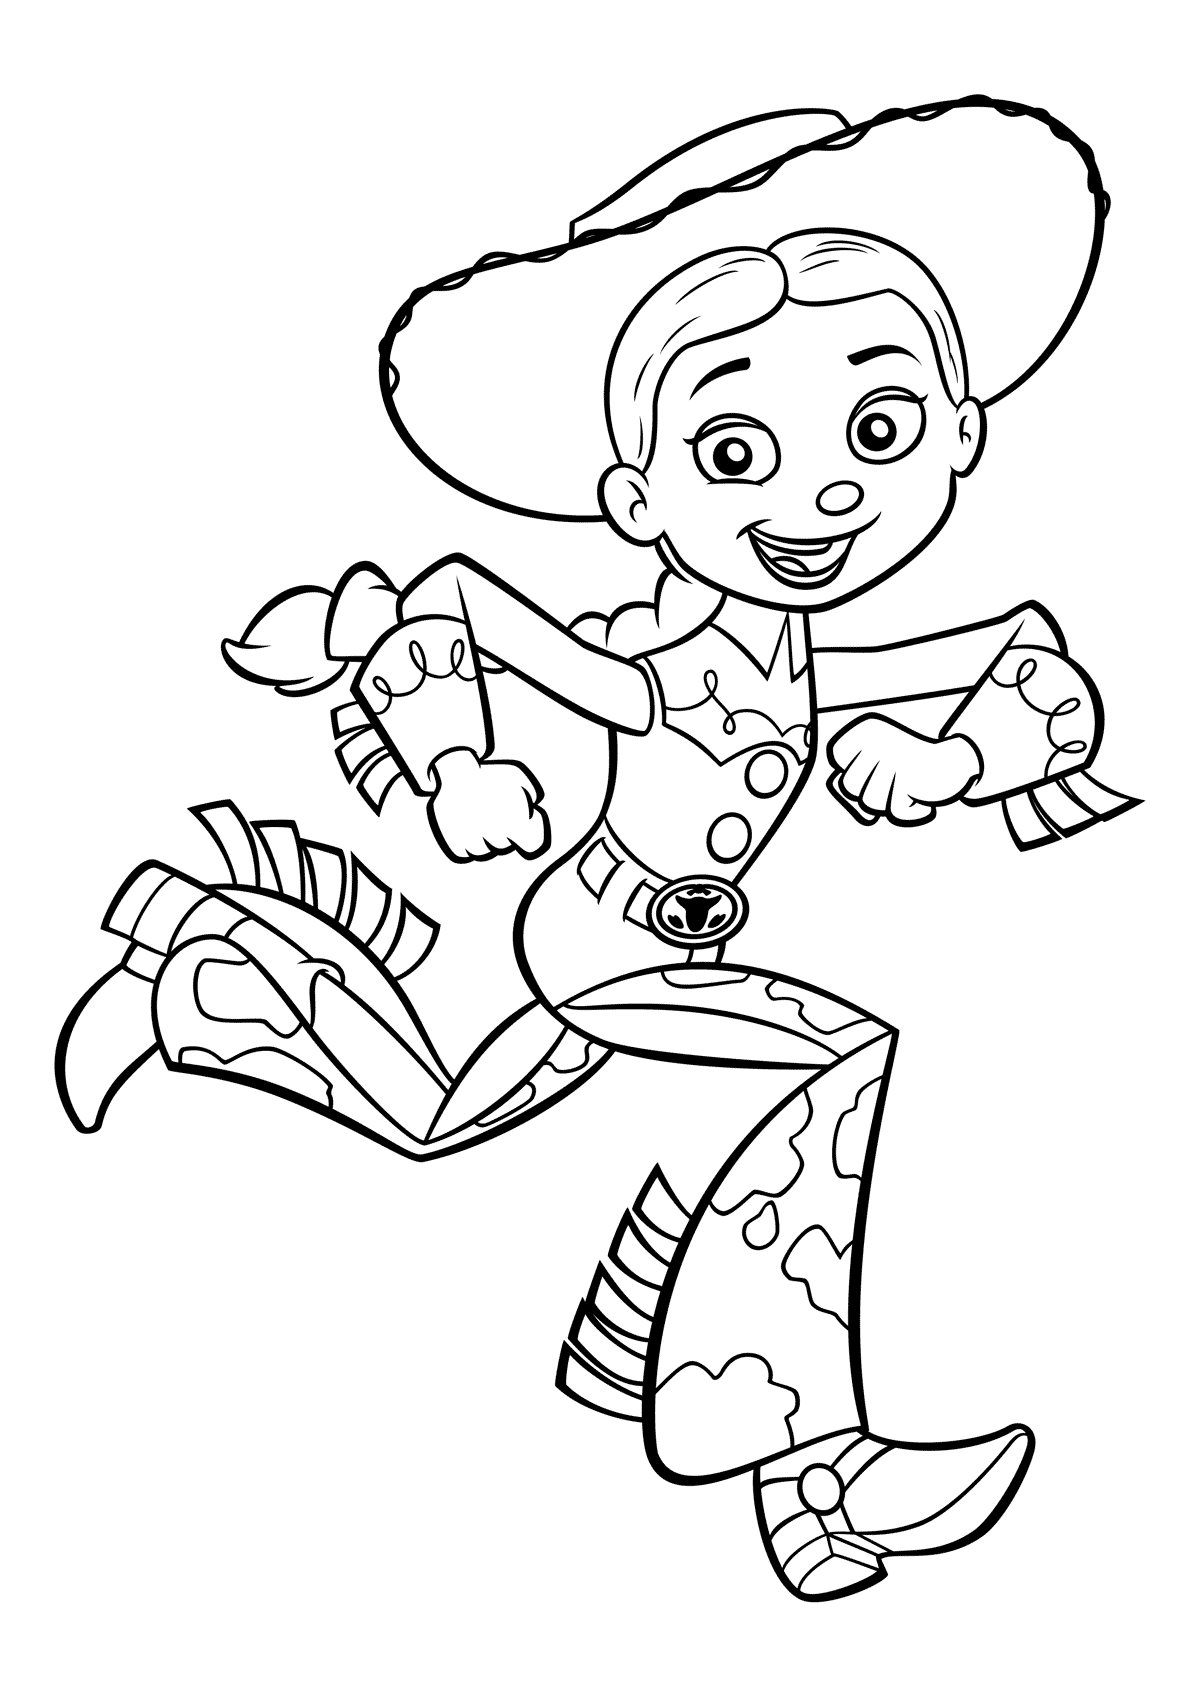 Free Coloring Print Out Jessie Coloring Pages To Down - vrogue.co